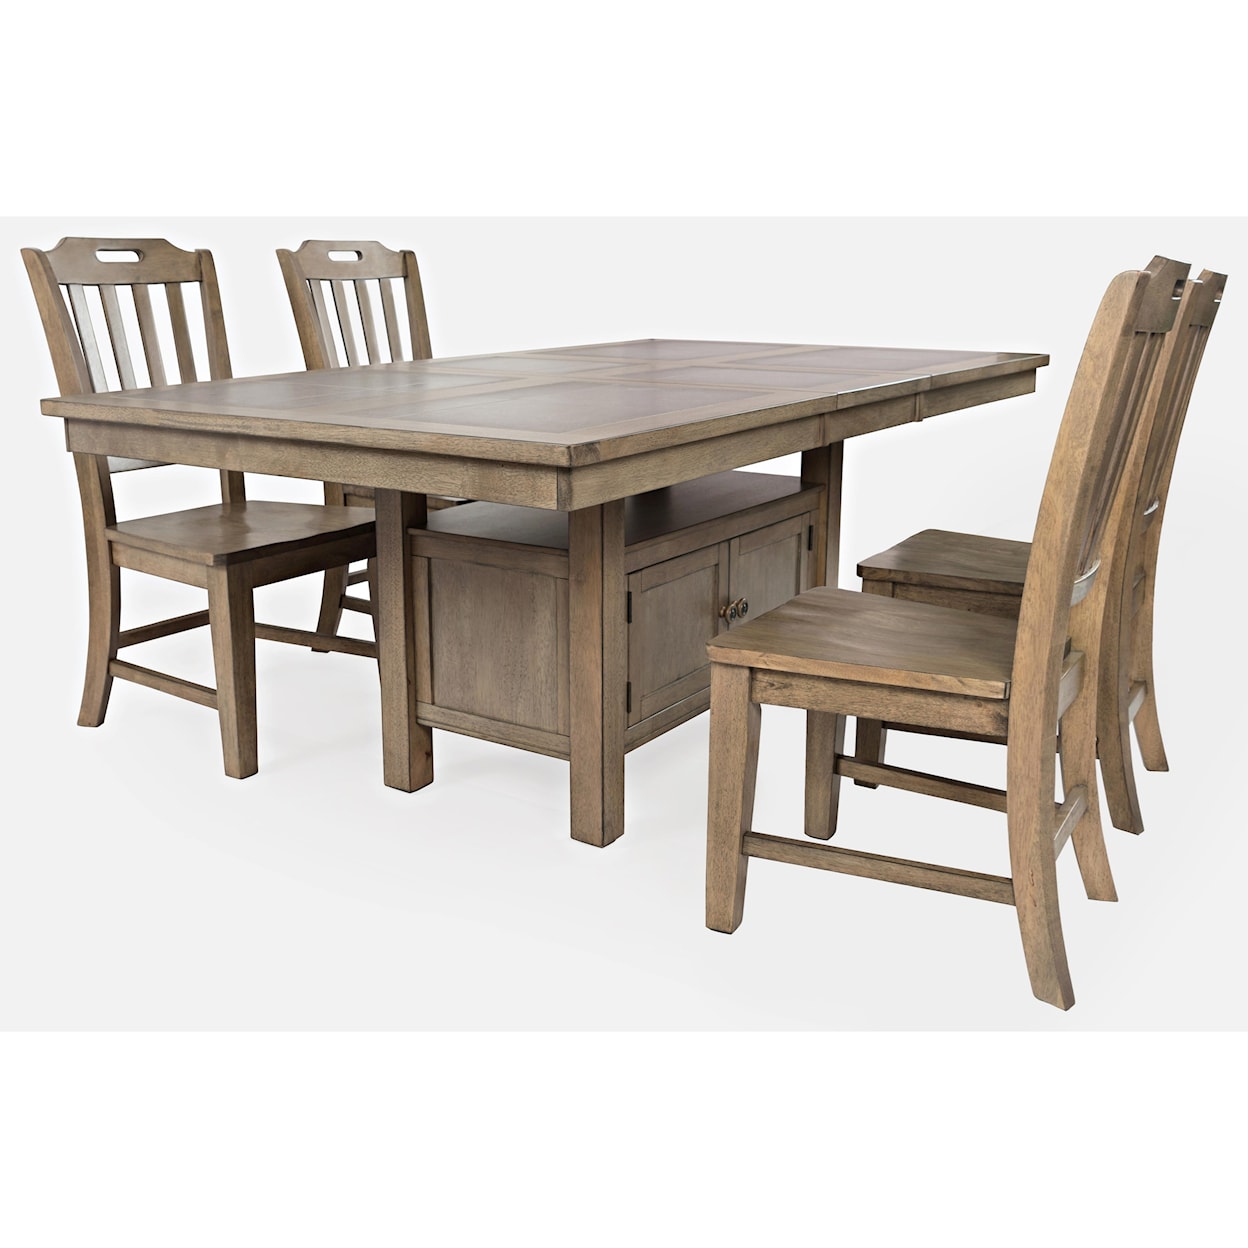 Jofran Prescott Park 5-Piece Dining Table and Chair Set